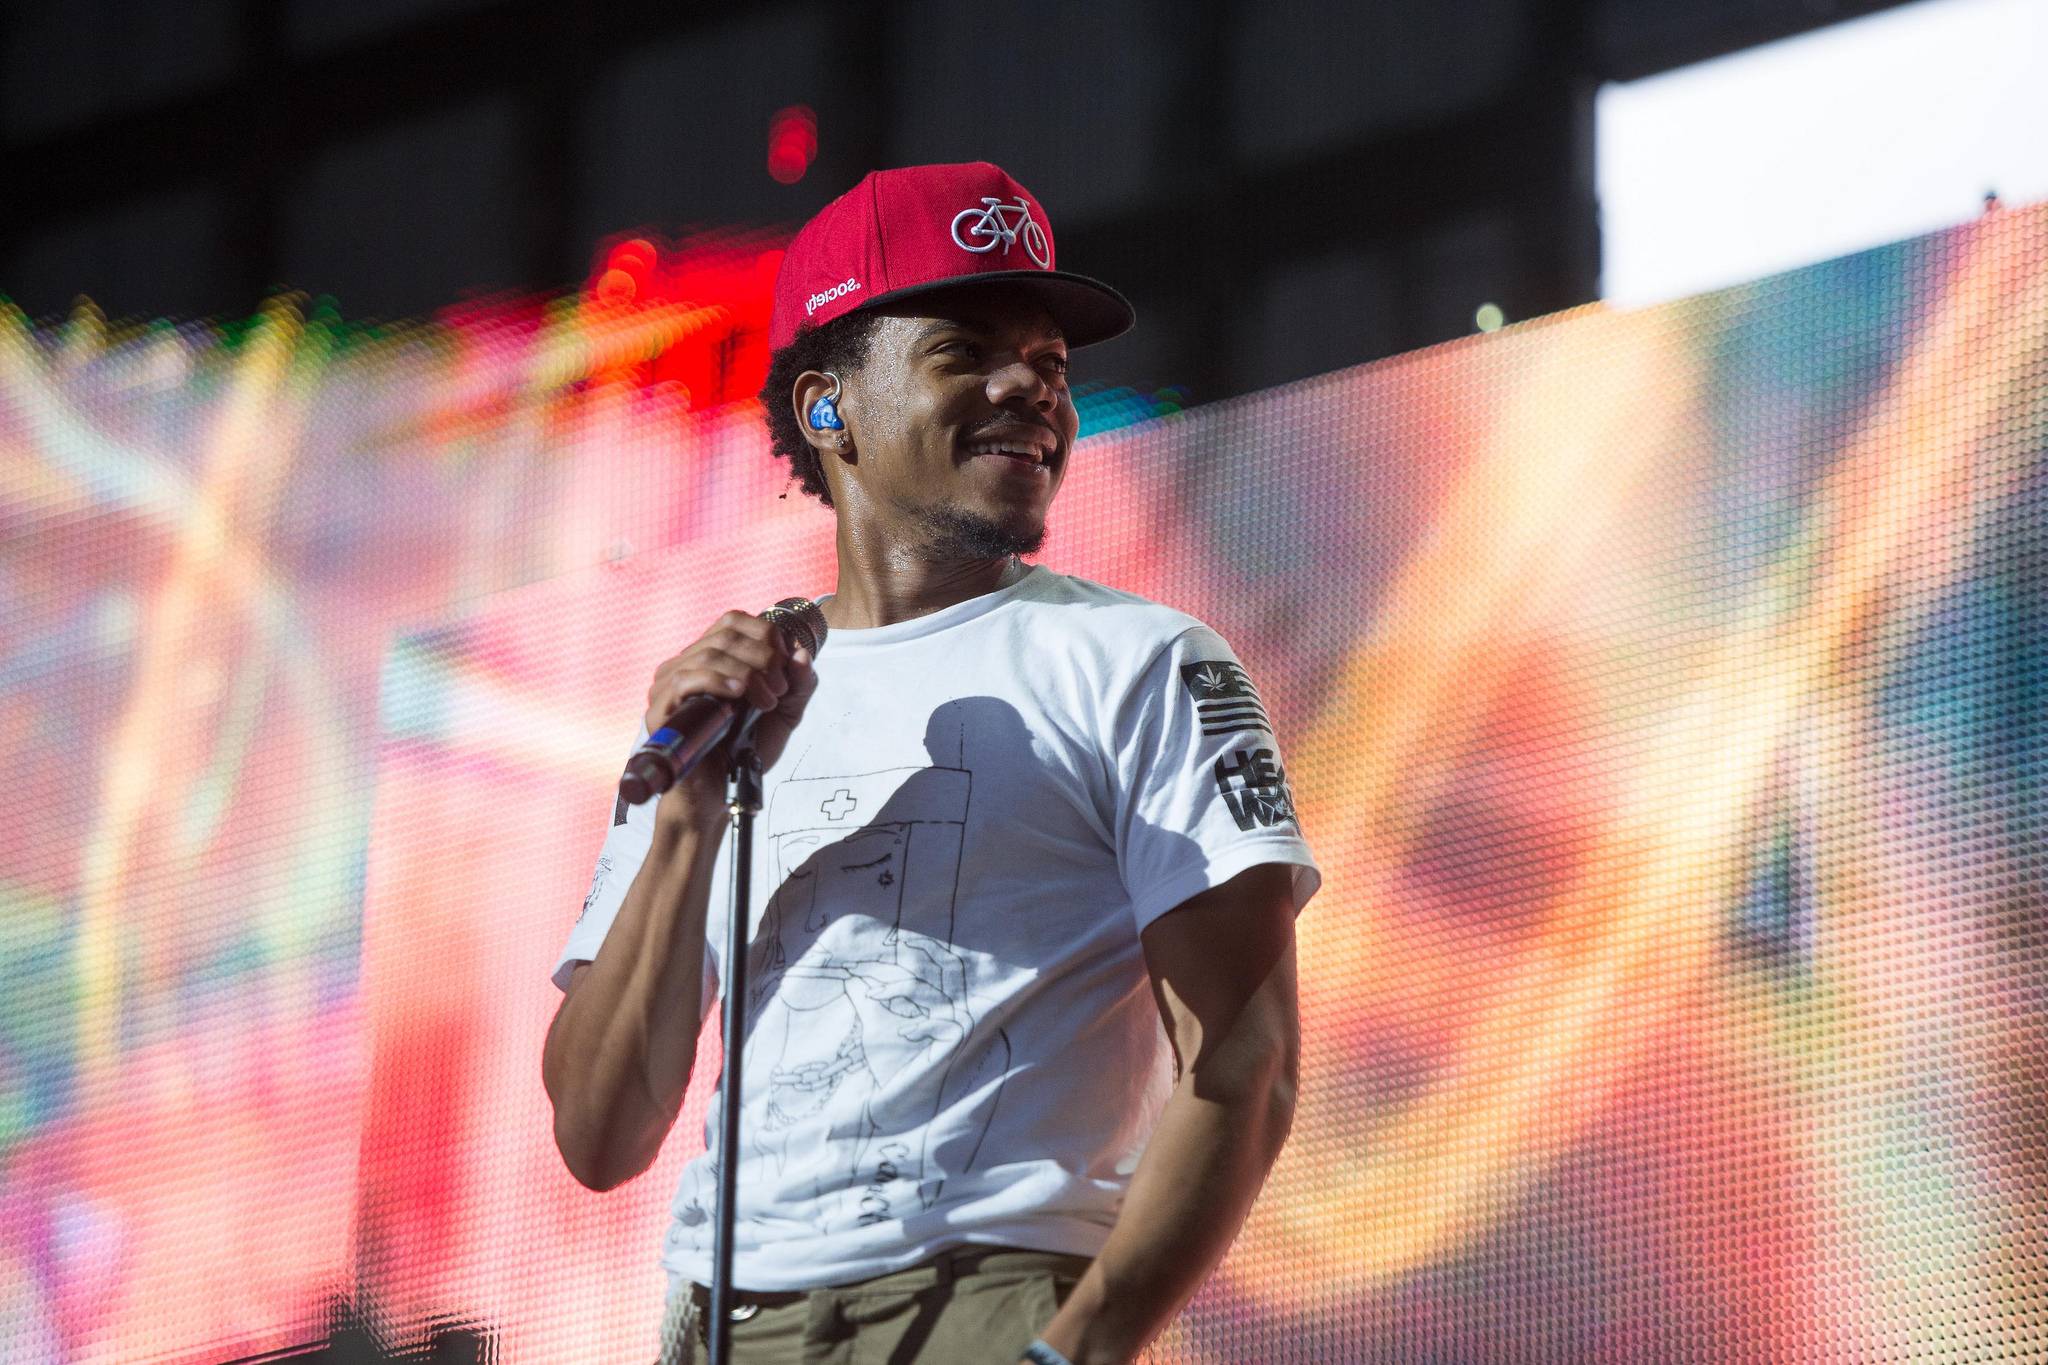 Chance the Rapper donated $1 million to local schools